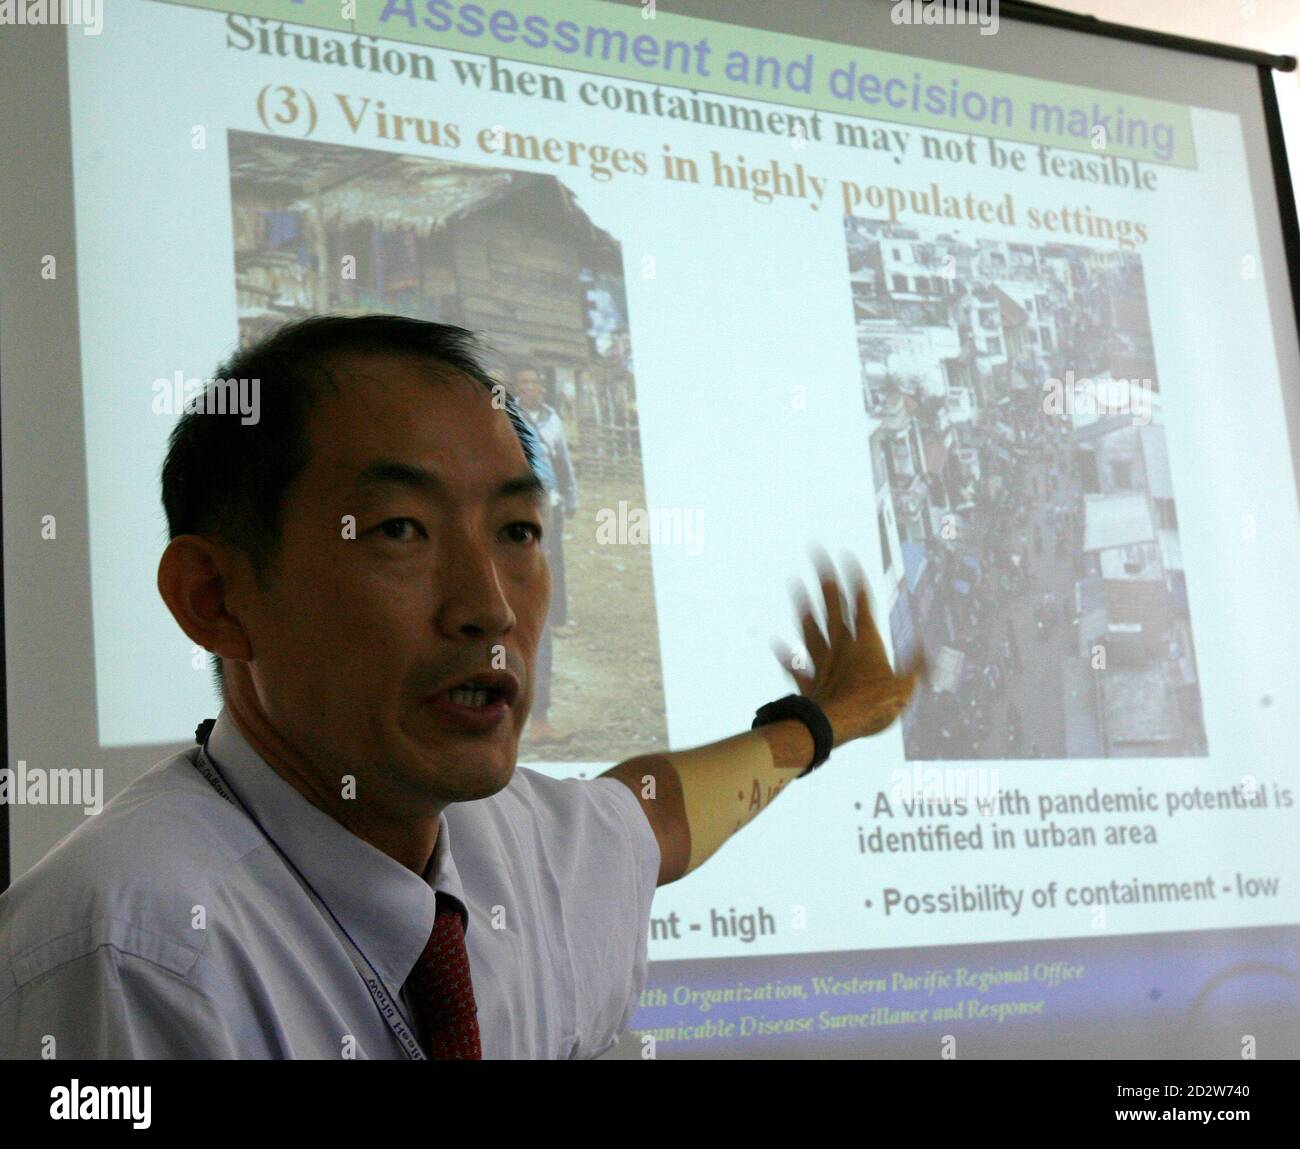 Takeshi Kasai, regional adviser of the World Health Organisation's (WHO) Communicable Disease Surveillance and Response, briefs the media on the birdflu simulation drill conducted by the WHO, Association of Southeast Asian Nations (ASEAN), and Japan at the WHO headquarters in Manila April 2, 2007. The simulation drill assesses how quick the region could respond on the first signs of a human influenza pandemic. REUTERS/Romeo Ranoco (PHILIPPINES) Stock Photo